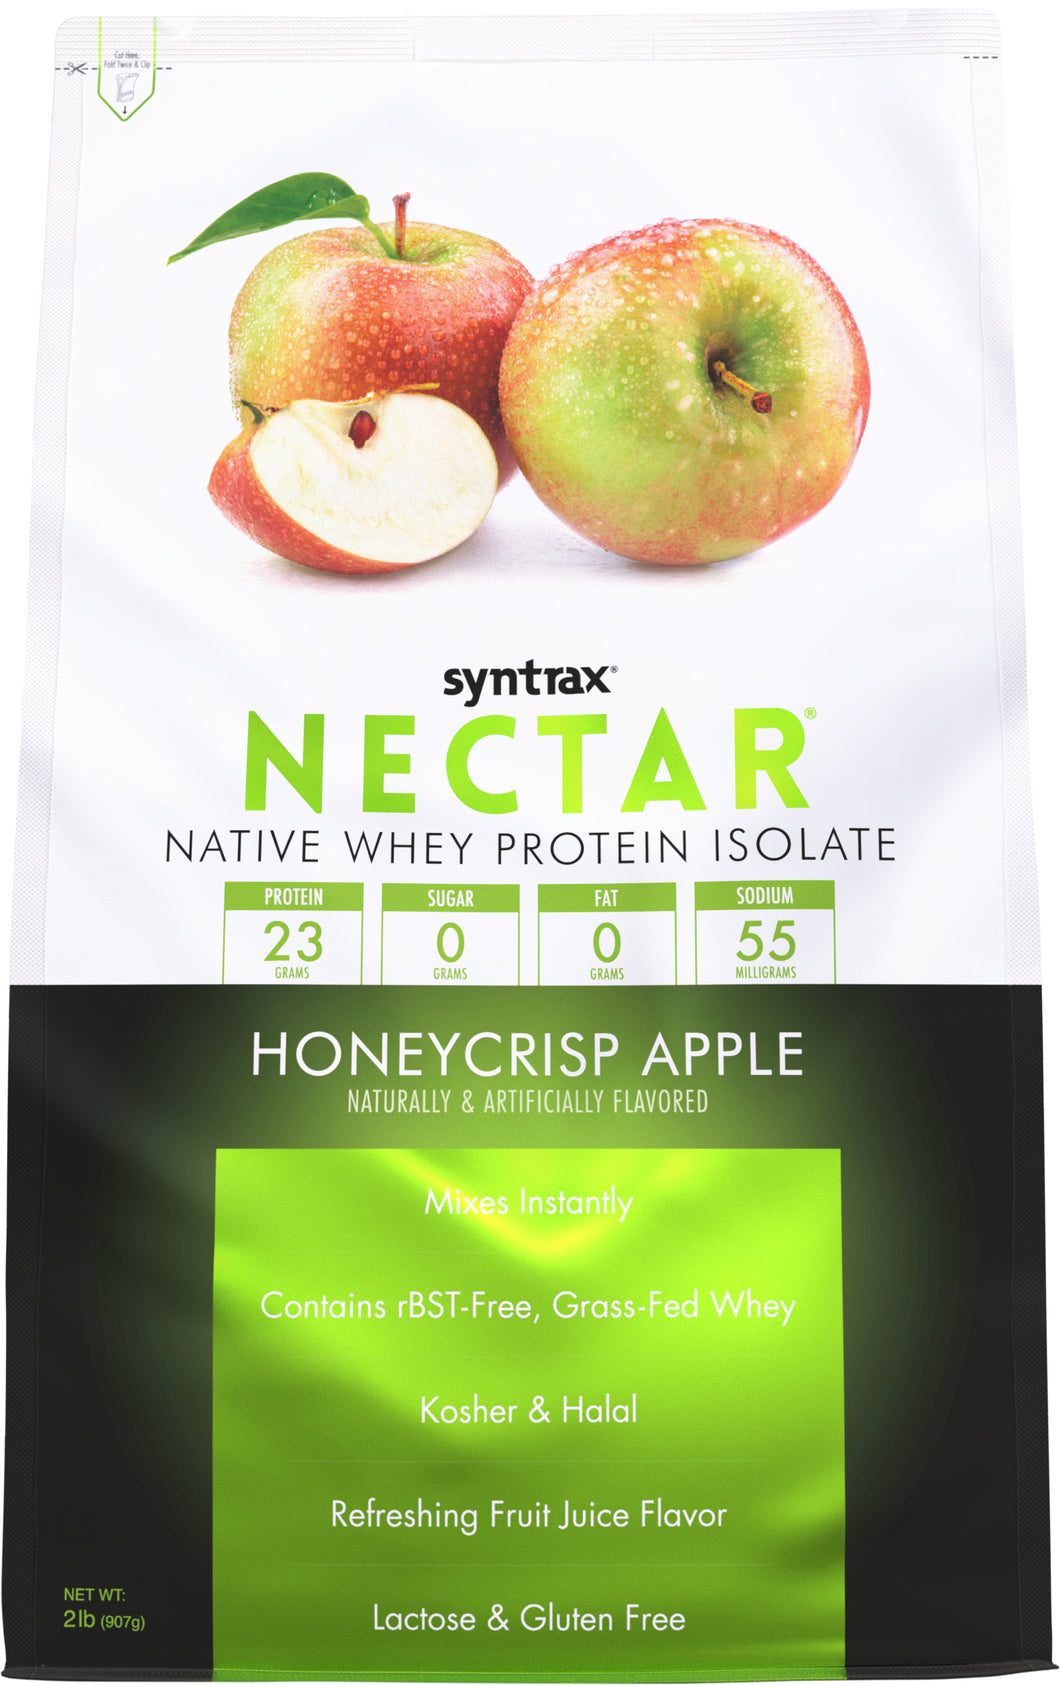 Nectar (Whey Protein Isolate) BY Syntrax